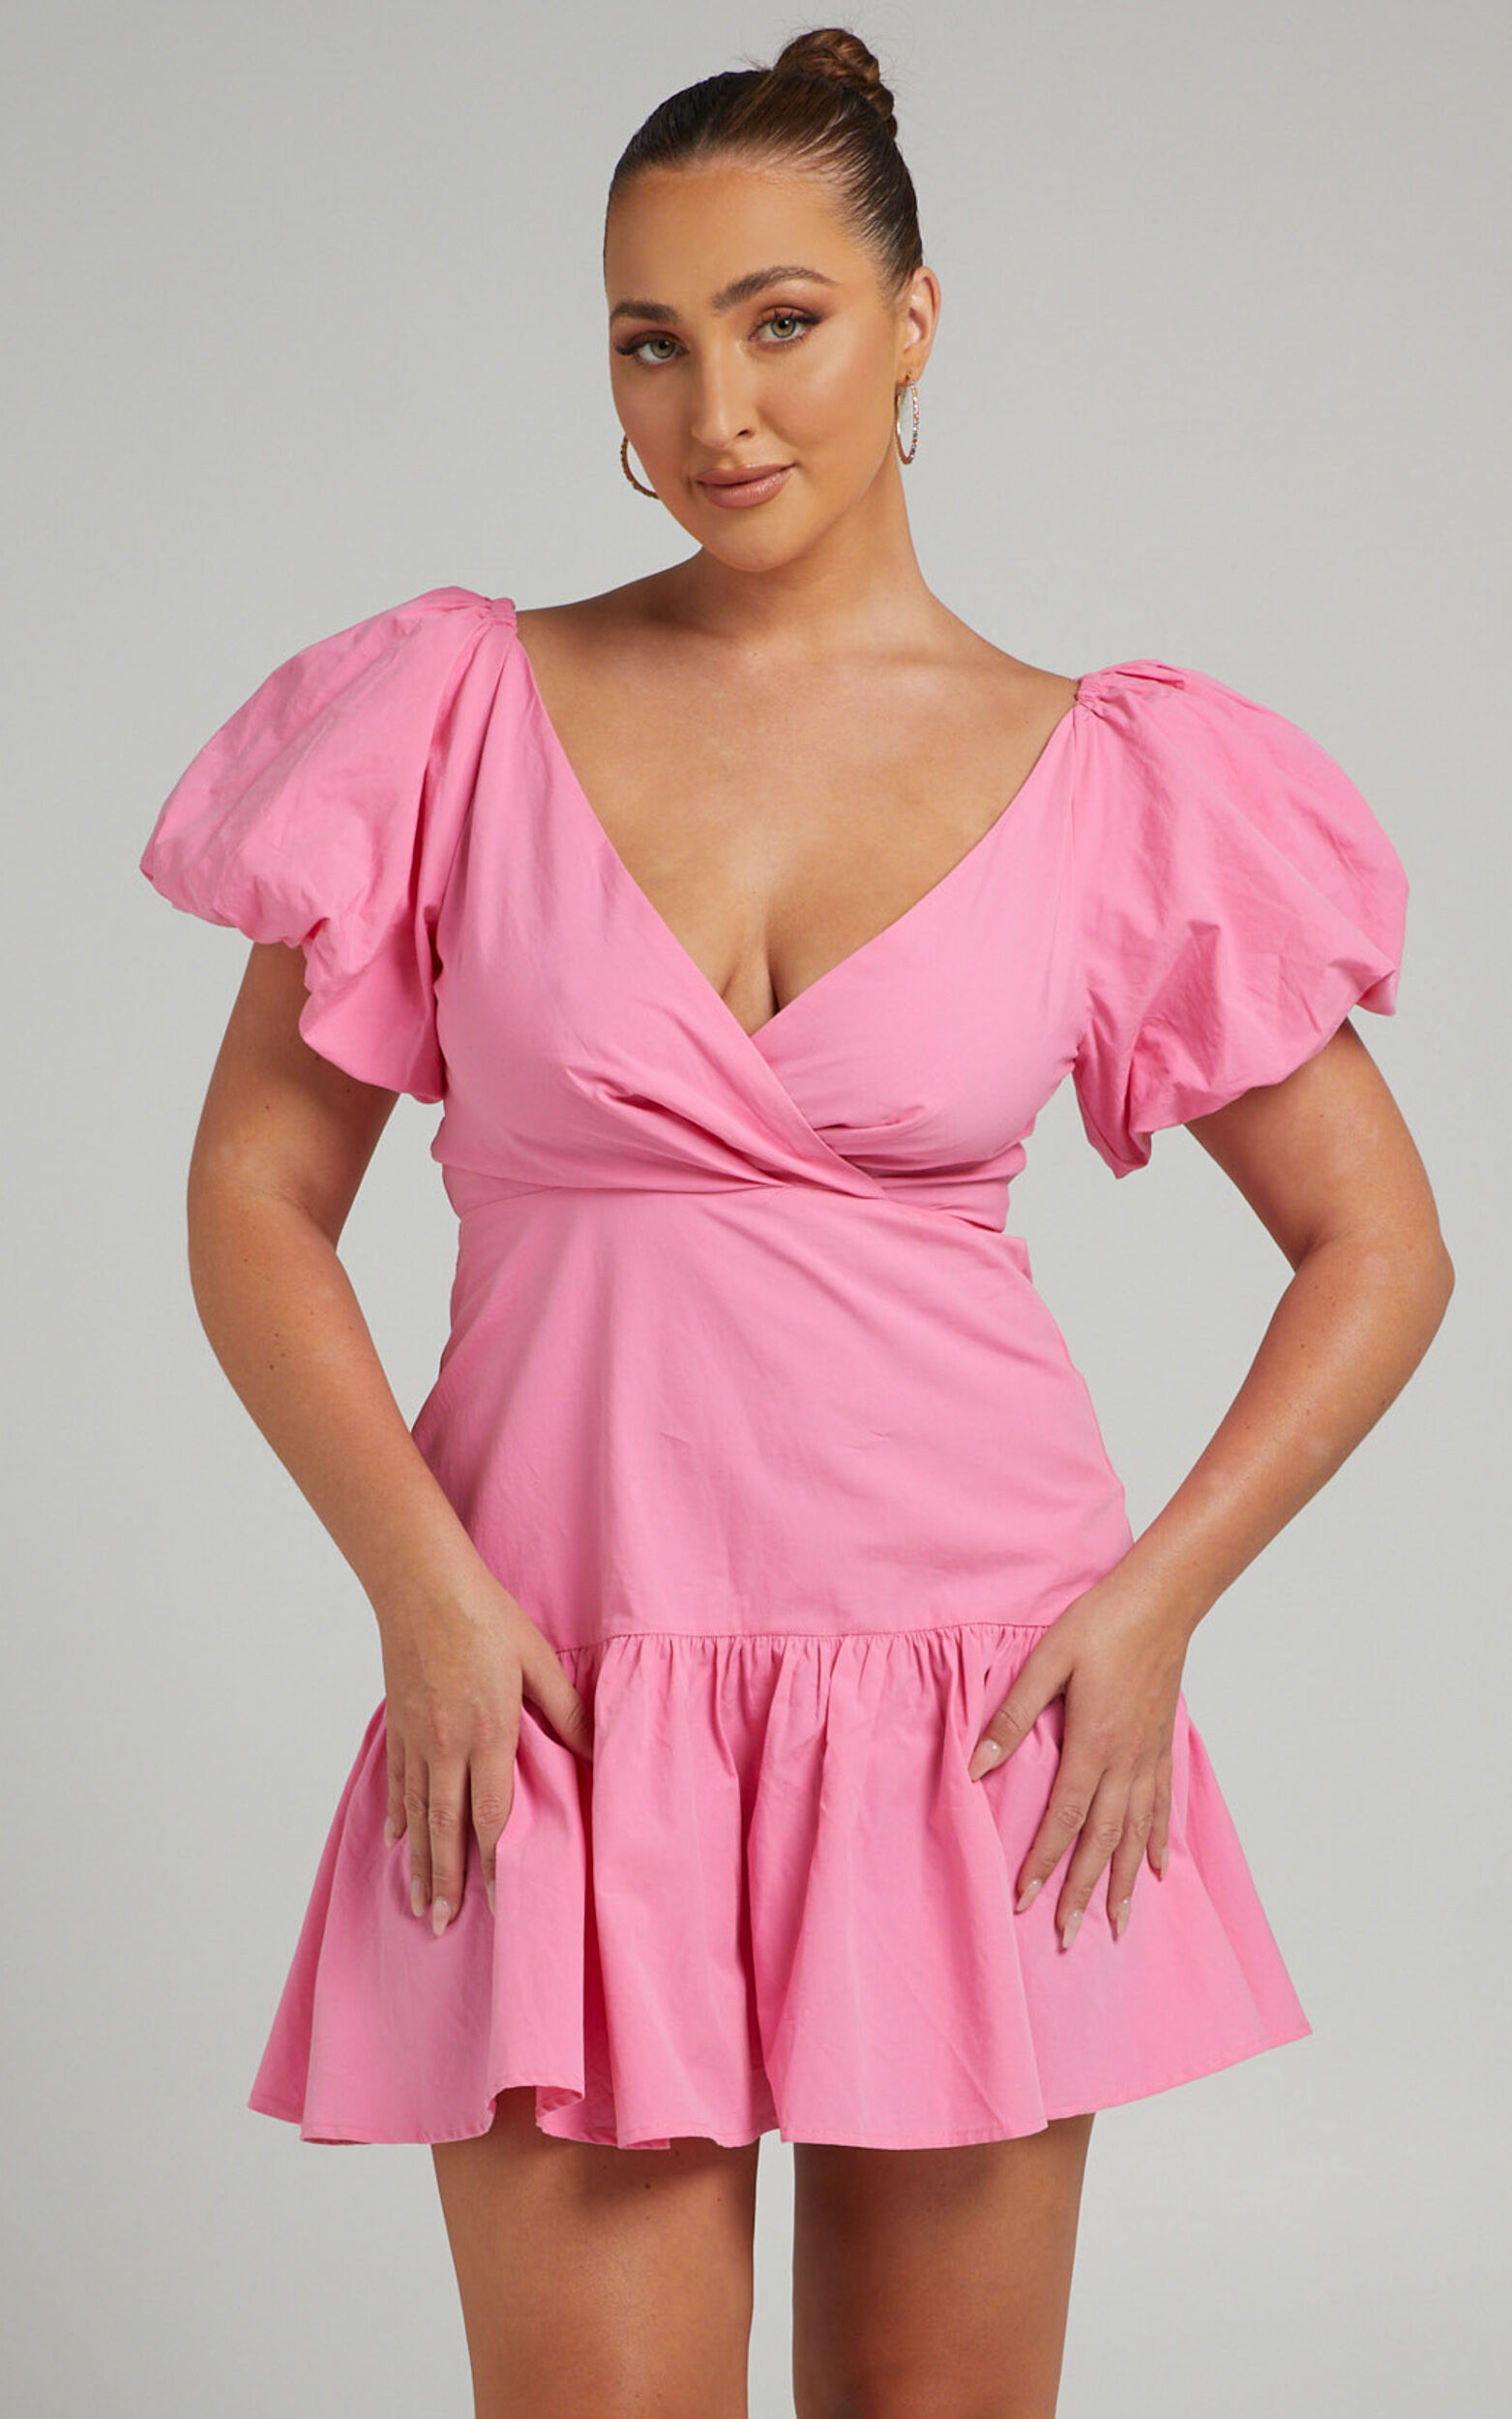 Brighton Puff Sleeve Ruffle Mini Dress in Bright Pink - 04, PNK4, super-hi-res image number null